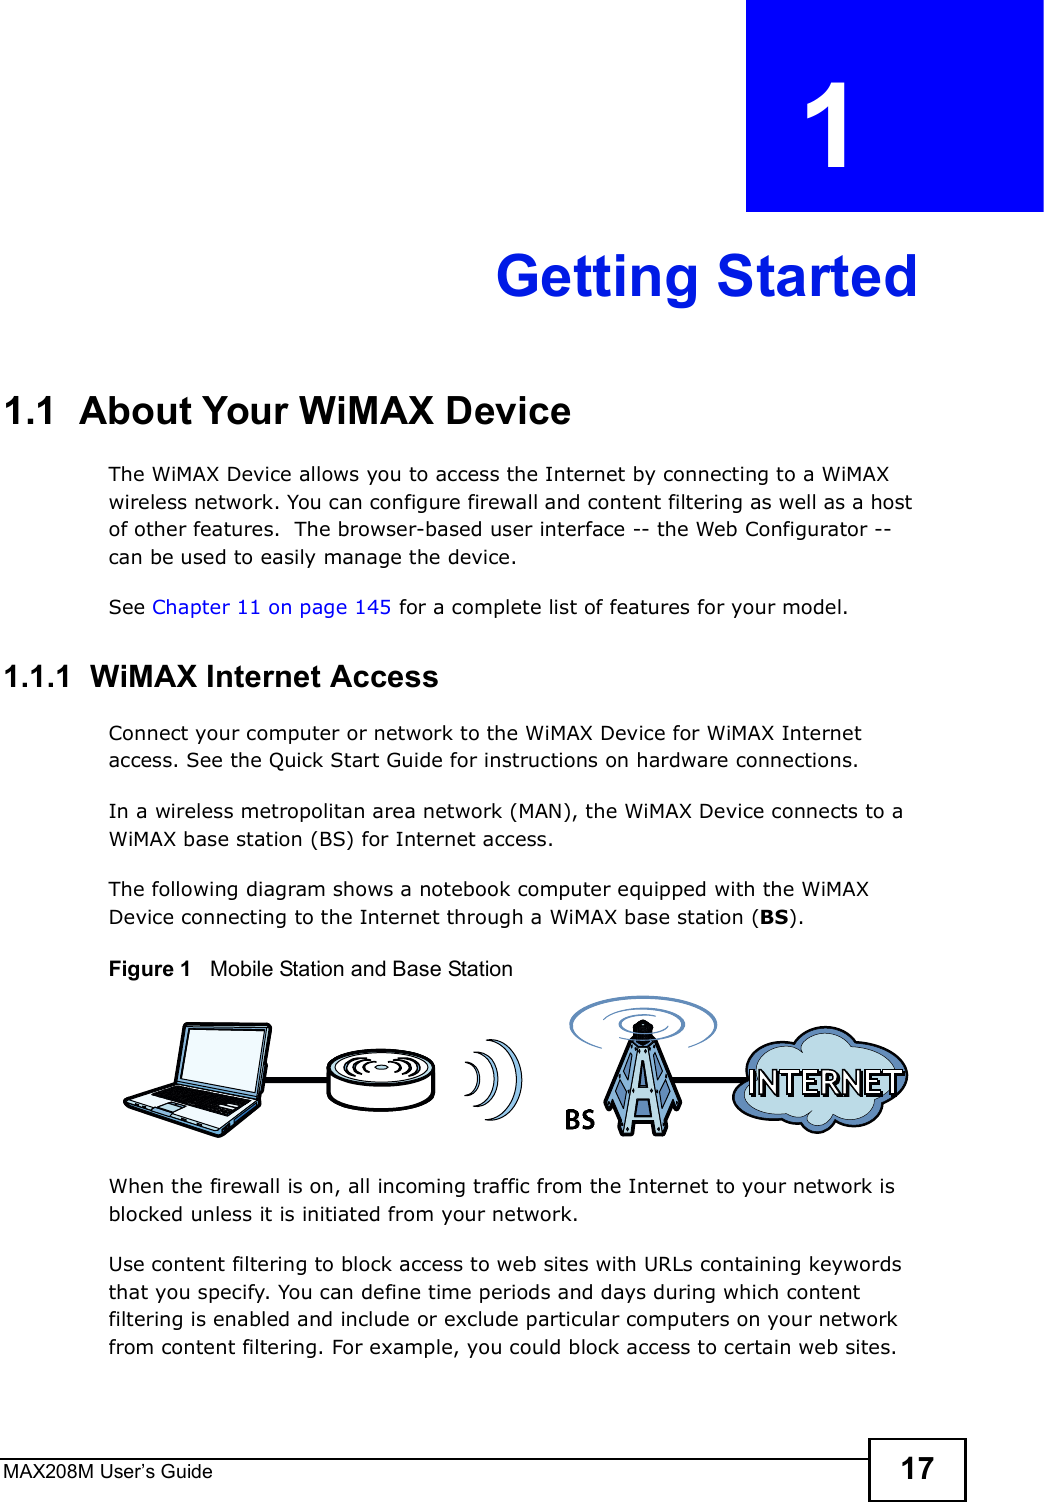 MAX208M User s Guide 17CHAPTER  1 Getting Started1.1  About Your WiMAX Device The WiMAX Device allows you to access the Internet by connecting to a WiMAX wireless network. You can configure firewall and content filtering as well as a host of other features.  The browser-based user interface -- the Web Configurator -- can be used to easily manage the device.See Chapter 11 on page 145 for a complete list of features for your model.1.1.1  WiMAX Internet AccessConnect your computer or network to the WiMAX Device for WiMAX Internet access. See the Quick Start Guide for instructions on hardware connections.In a wireless metropolitan area network (MAN), the WiMAX Device connects to a WiMAX base station (BS) for Internet access. The following diagram shows a notebook computer equipped with the WiMAX Device connecting to the Internet through a WiMAX base station (BS).Figure 1   Mobile Station and Base StationWhen the firewall is on, all incoming traffic from the Internet to your network is blocked unless it is initiated from your network. Use content filtering to block access to web sites with URLs containing keywords that you specify. You can define time periods and days during which content filtering is enabled and include or exclude particular computers on your network from content filtering. For example, you could block access to certain web sites.